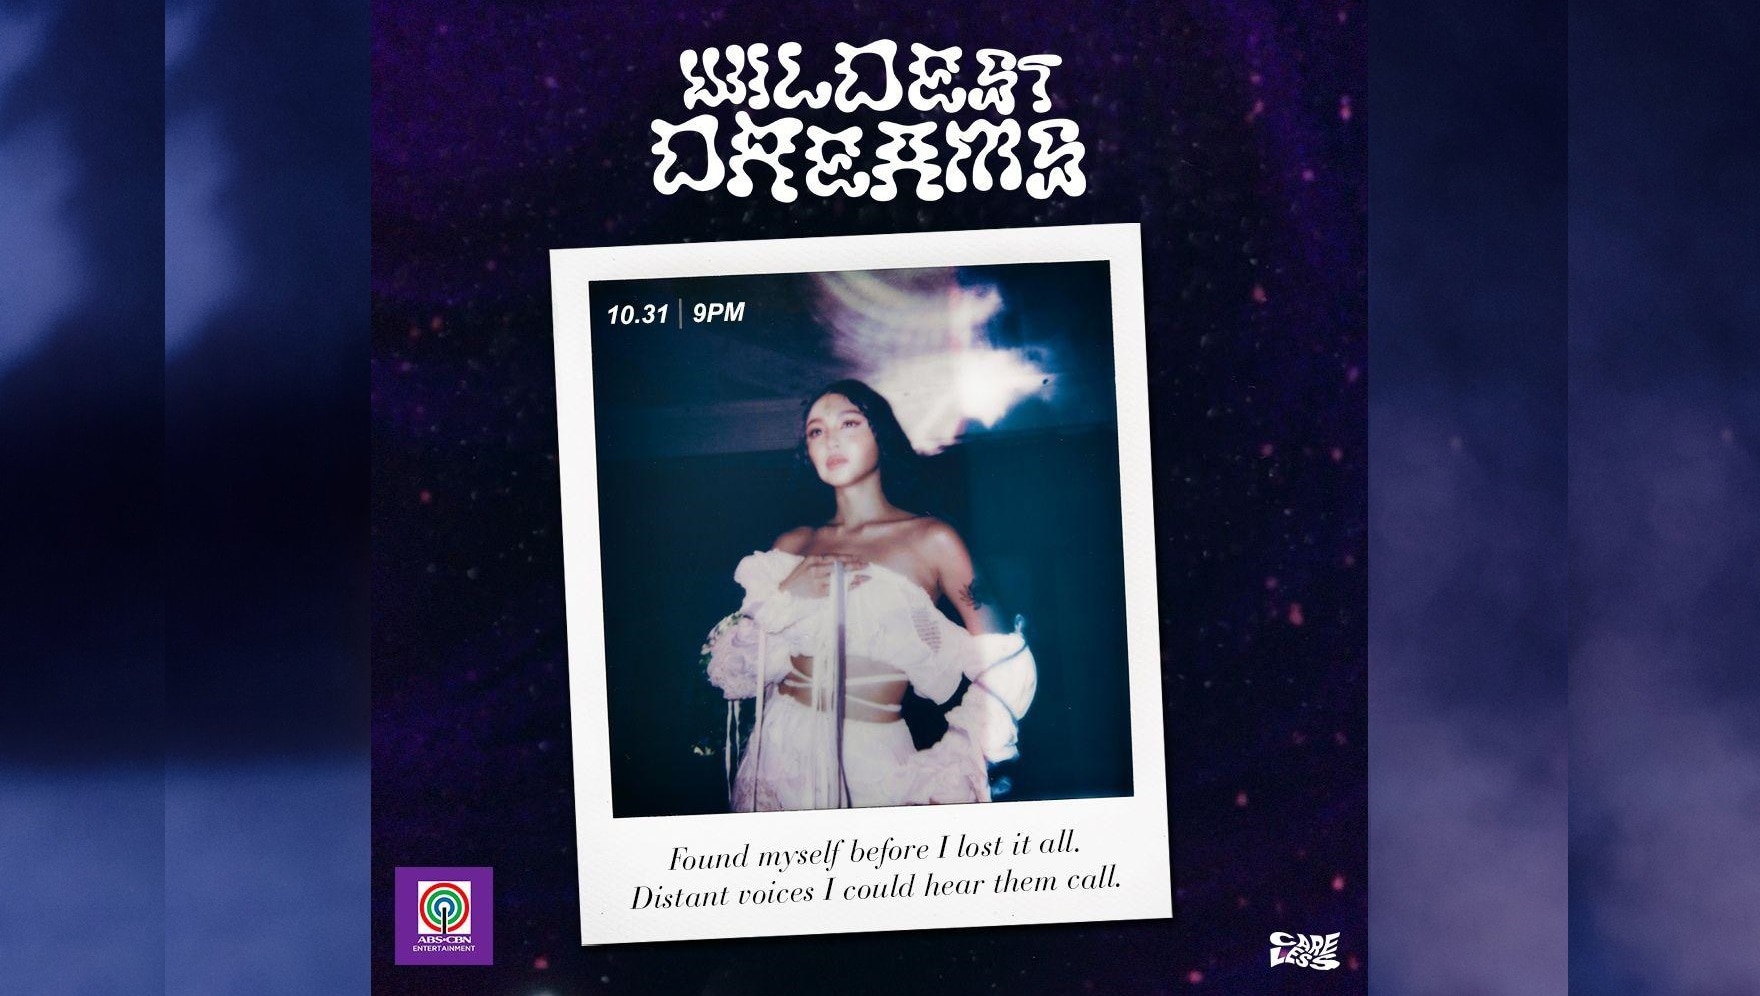 Nadine's "Wildest Dreams" visual album premieres exclusively on ABS-CBN Entertainment, Careless YouTube channels